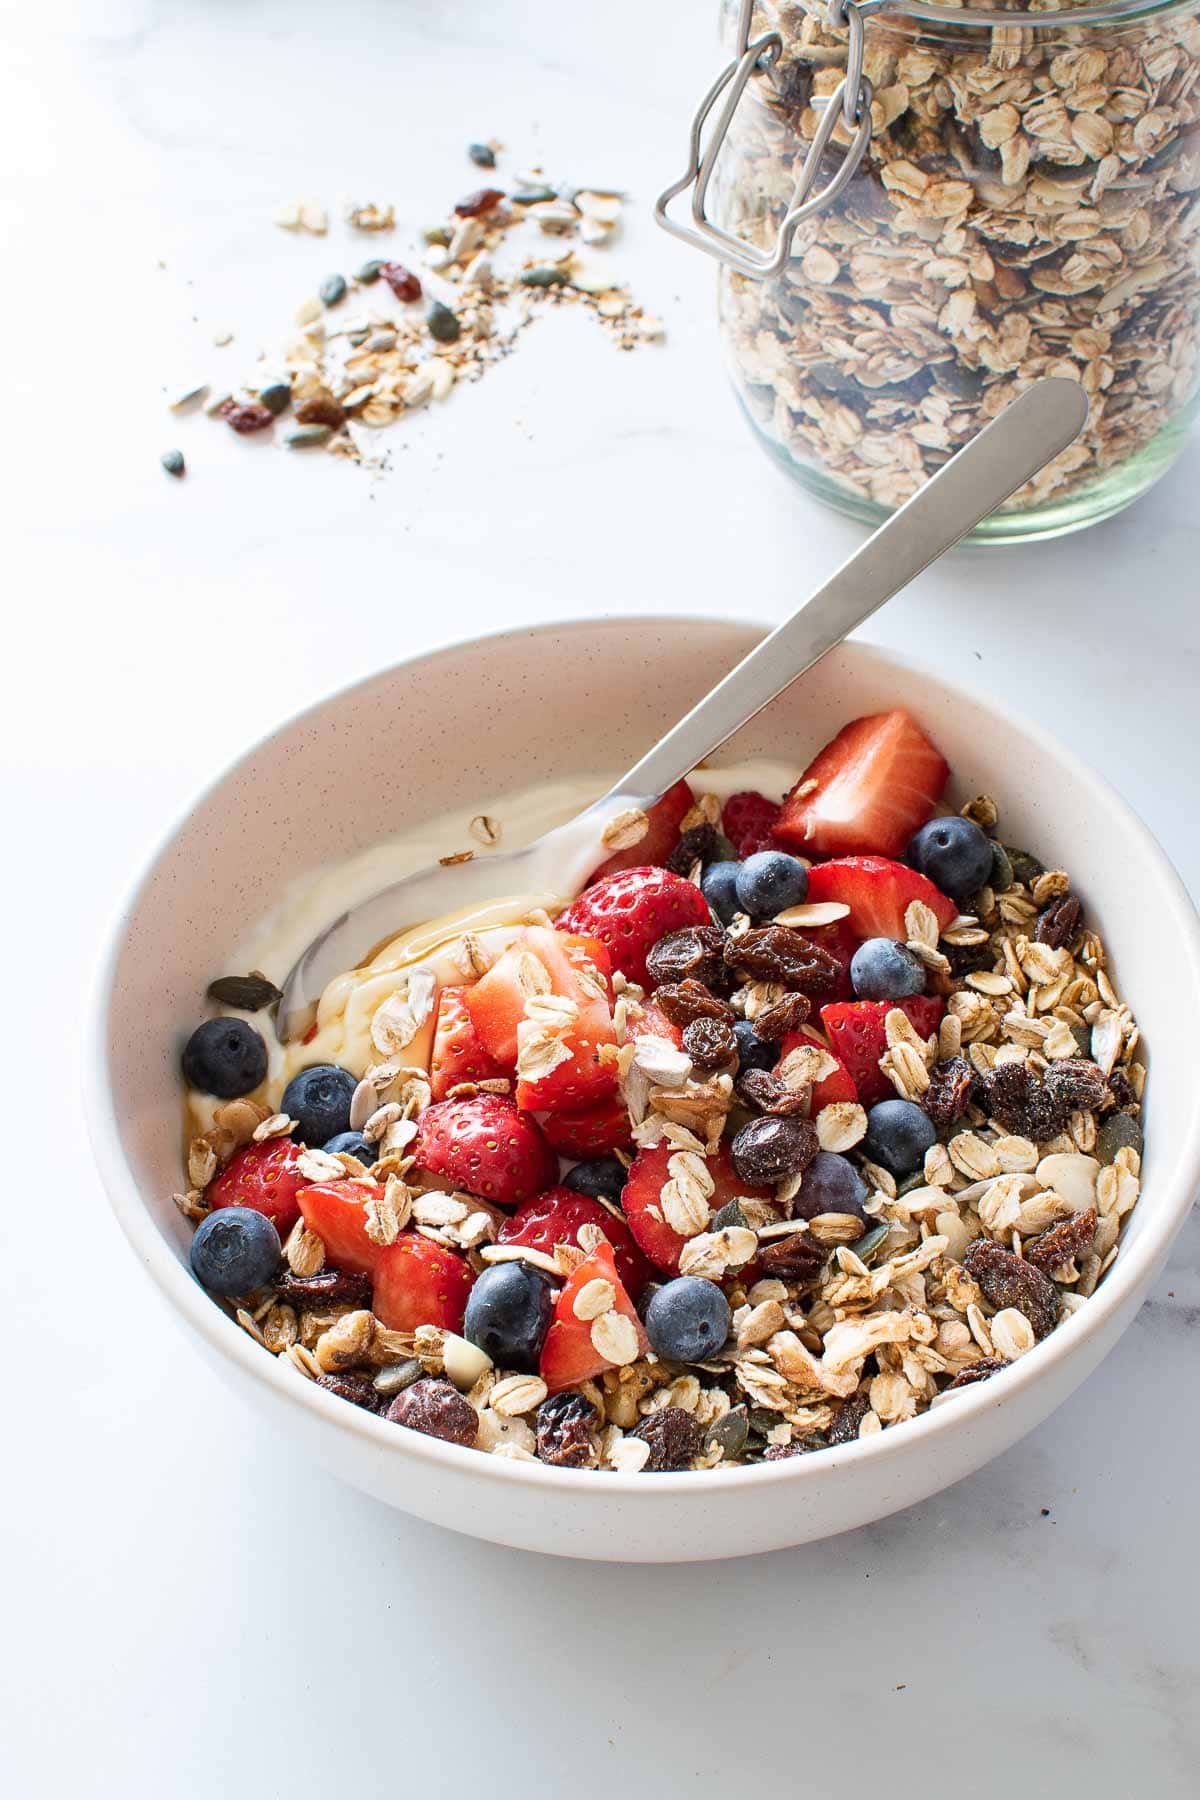 Toasted muesli in a bowl with yogurt and mixed berries.